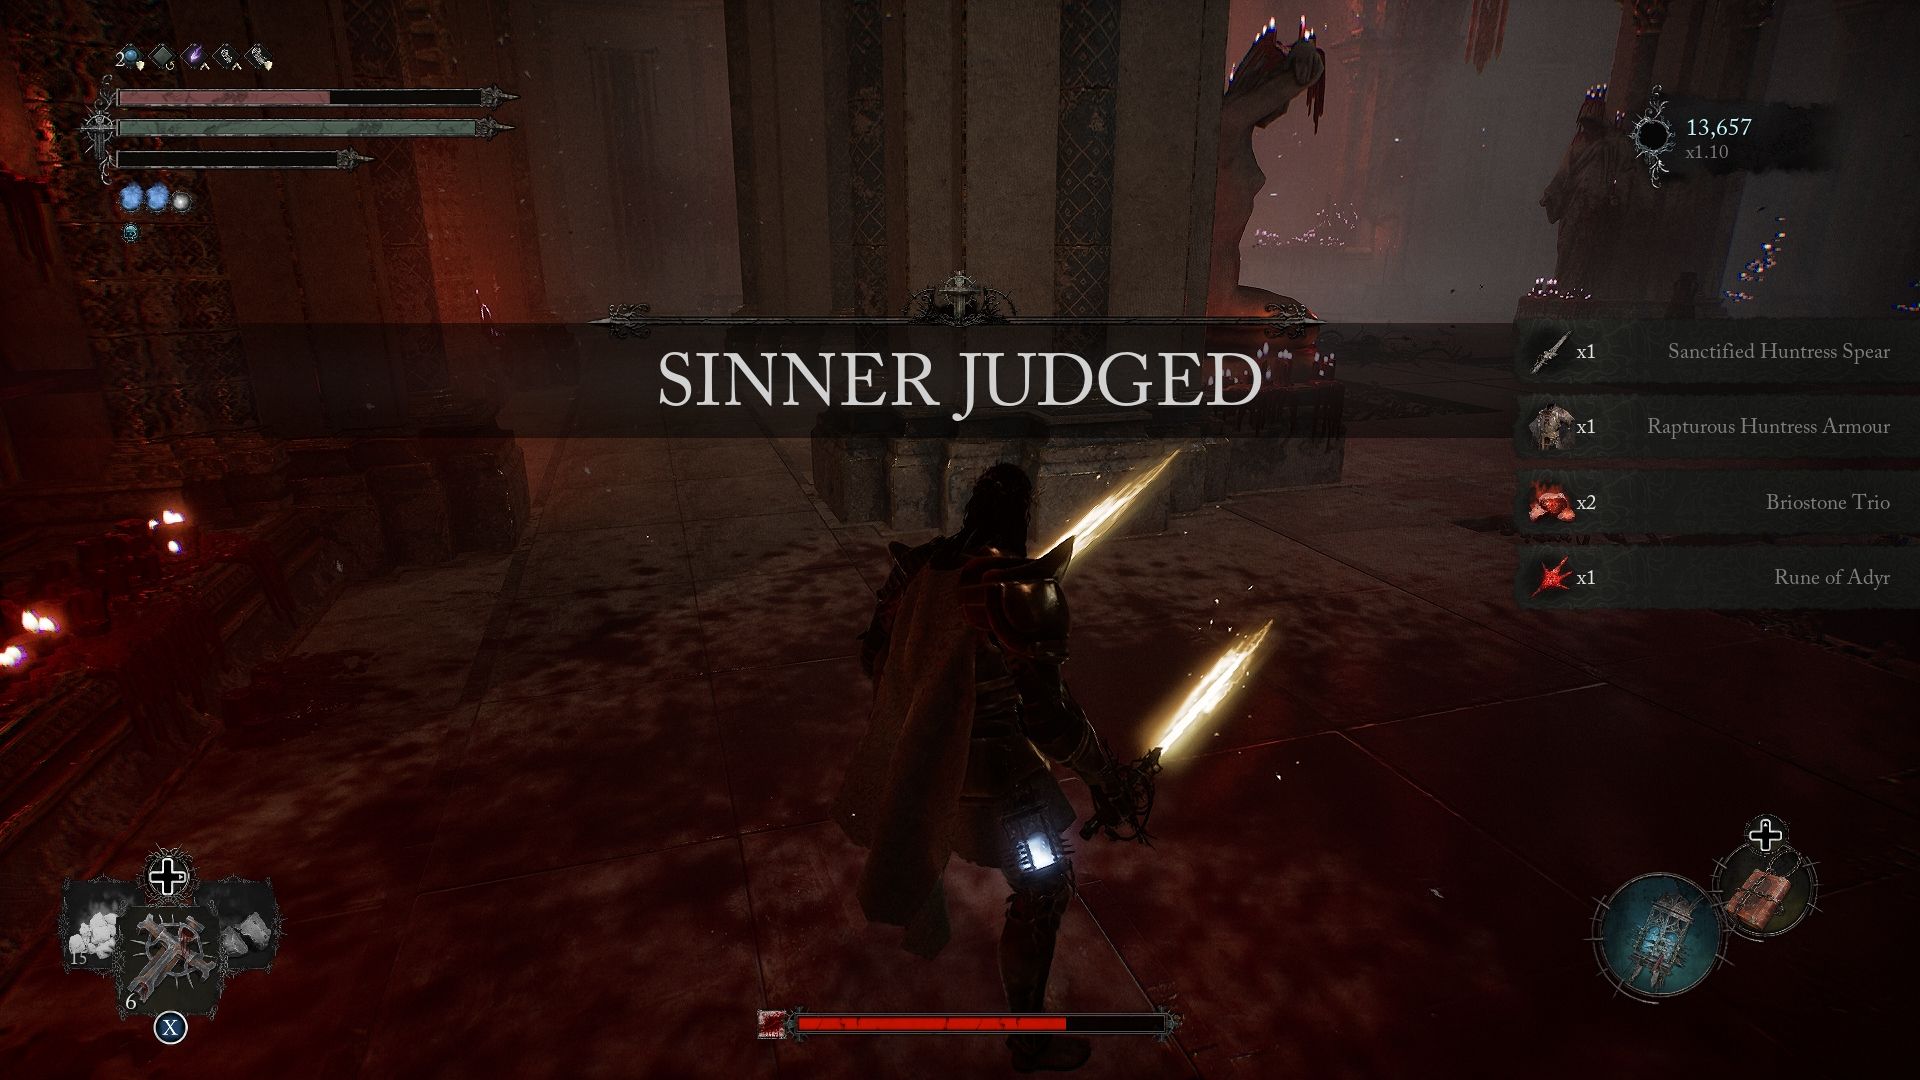 Player defeated Rapturous Huntress of the Dusk and claimed the Rune of Adyr Lords of the Fallen